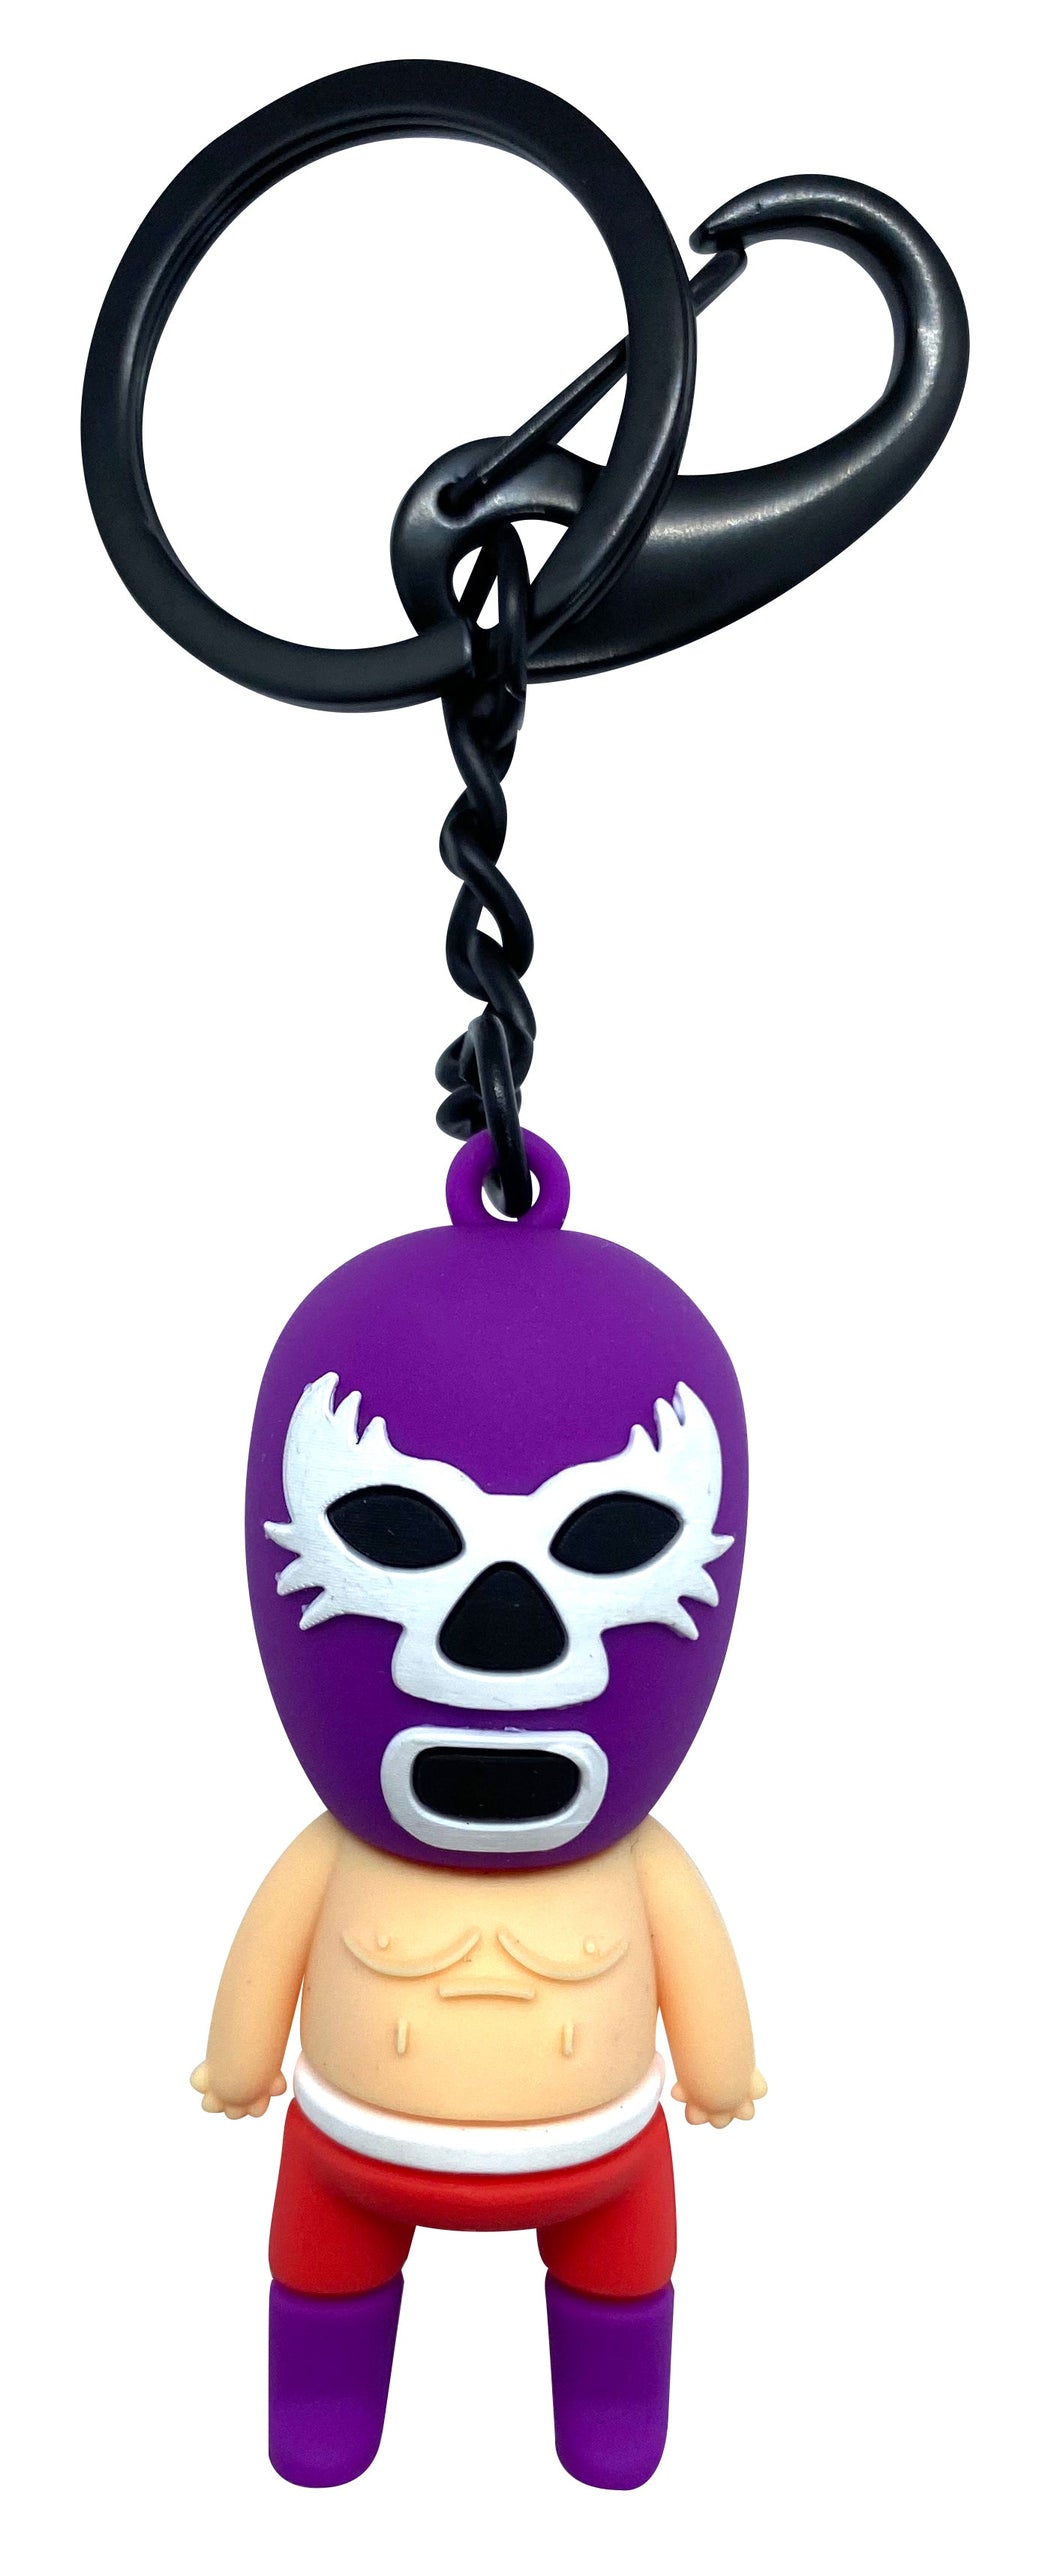 Mexican Wrestler Shaped 3D Keyring Purple 5.5cm - ByMexico